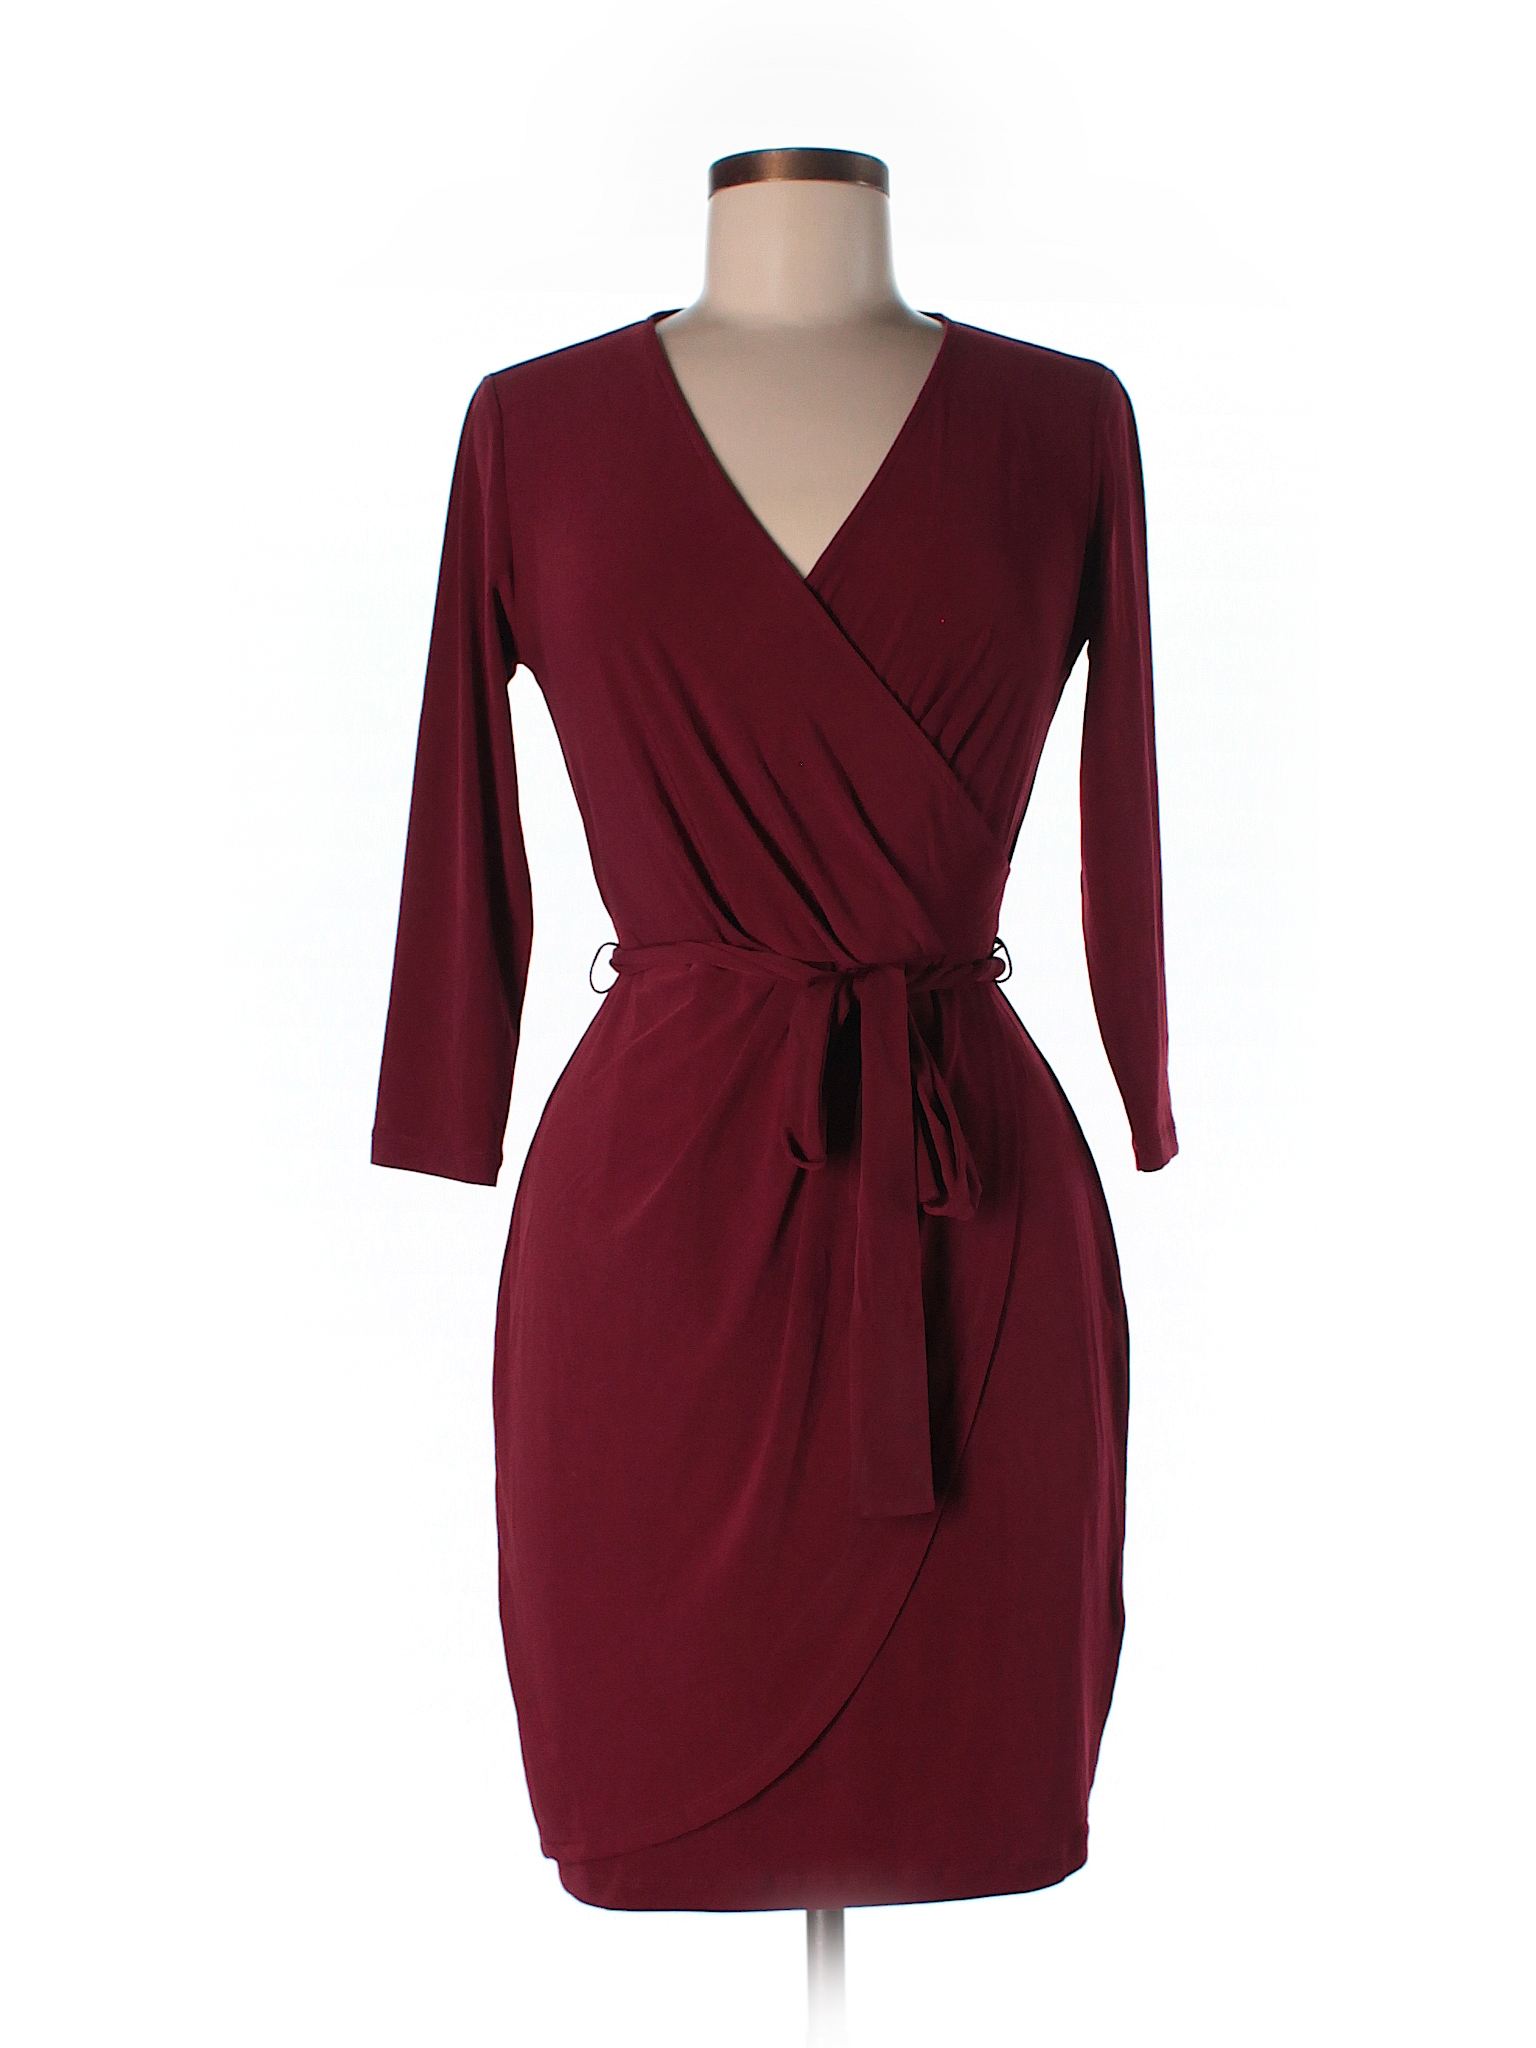 New York Clothing Co. Solid Burgundy Casual Dress Size XS - 68% off ...